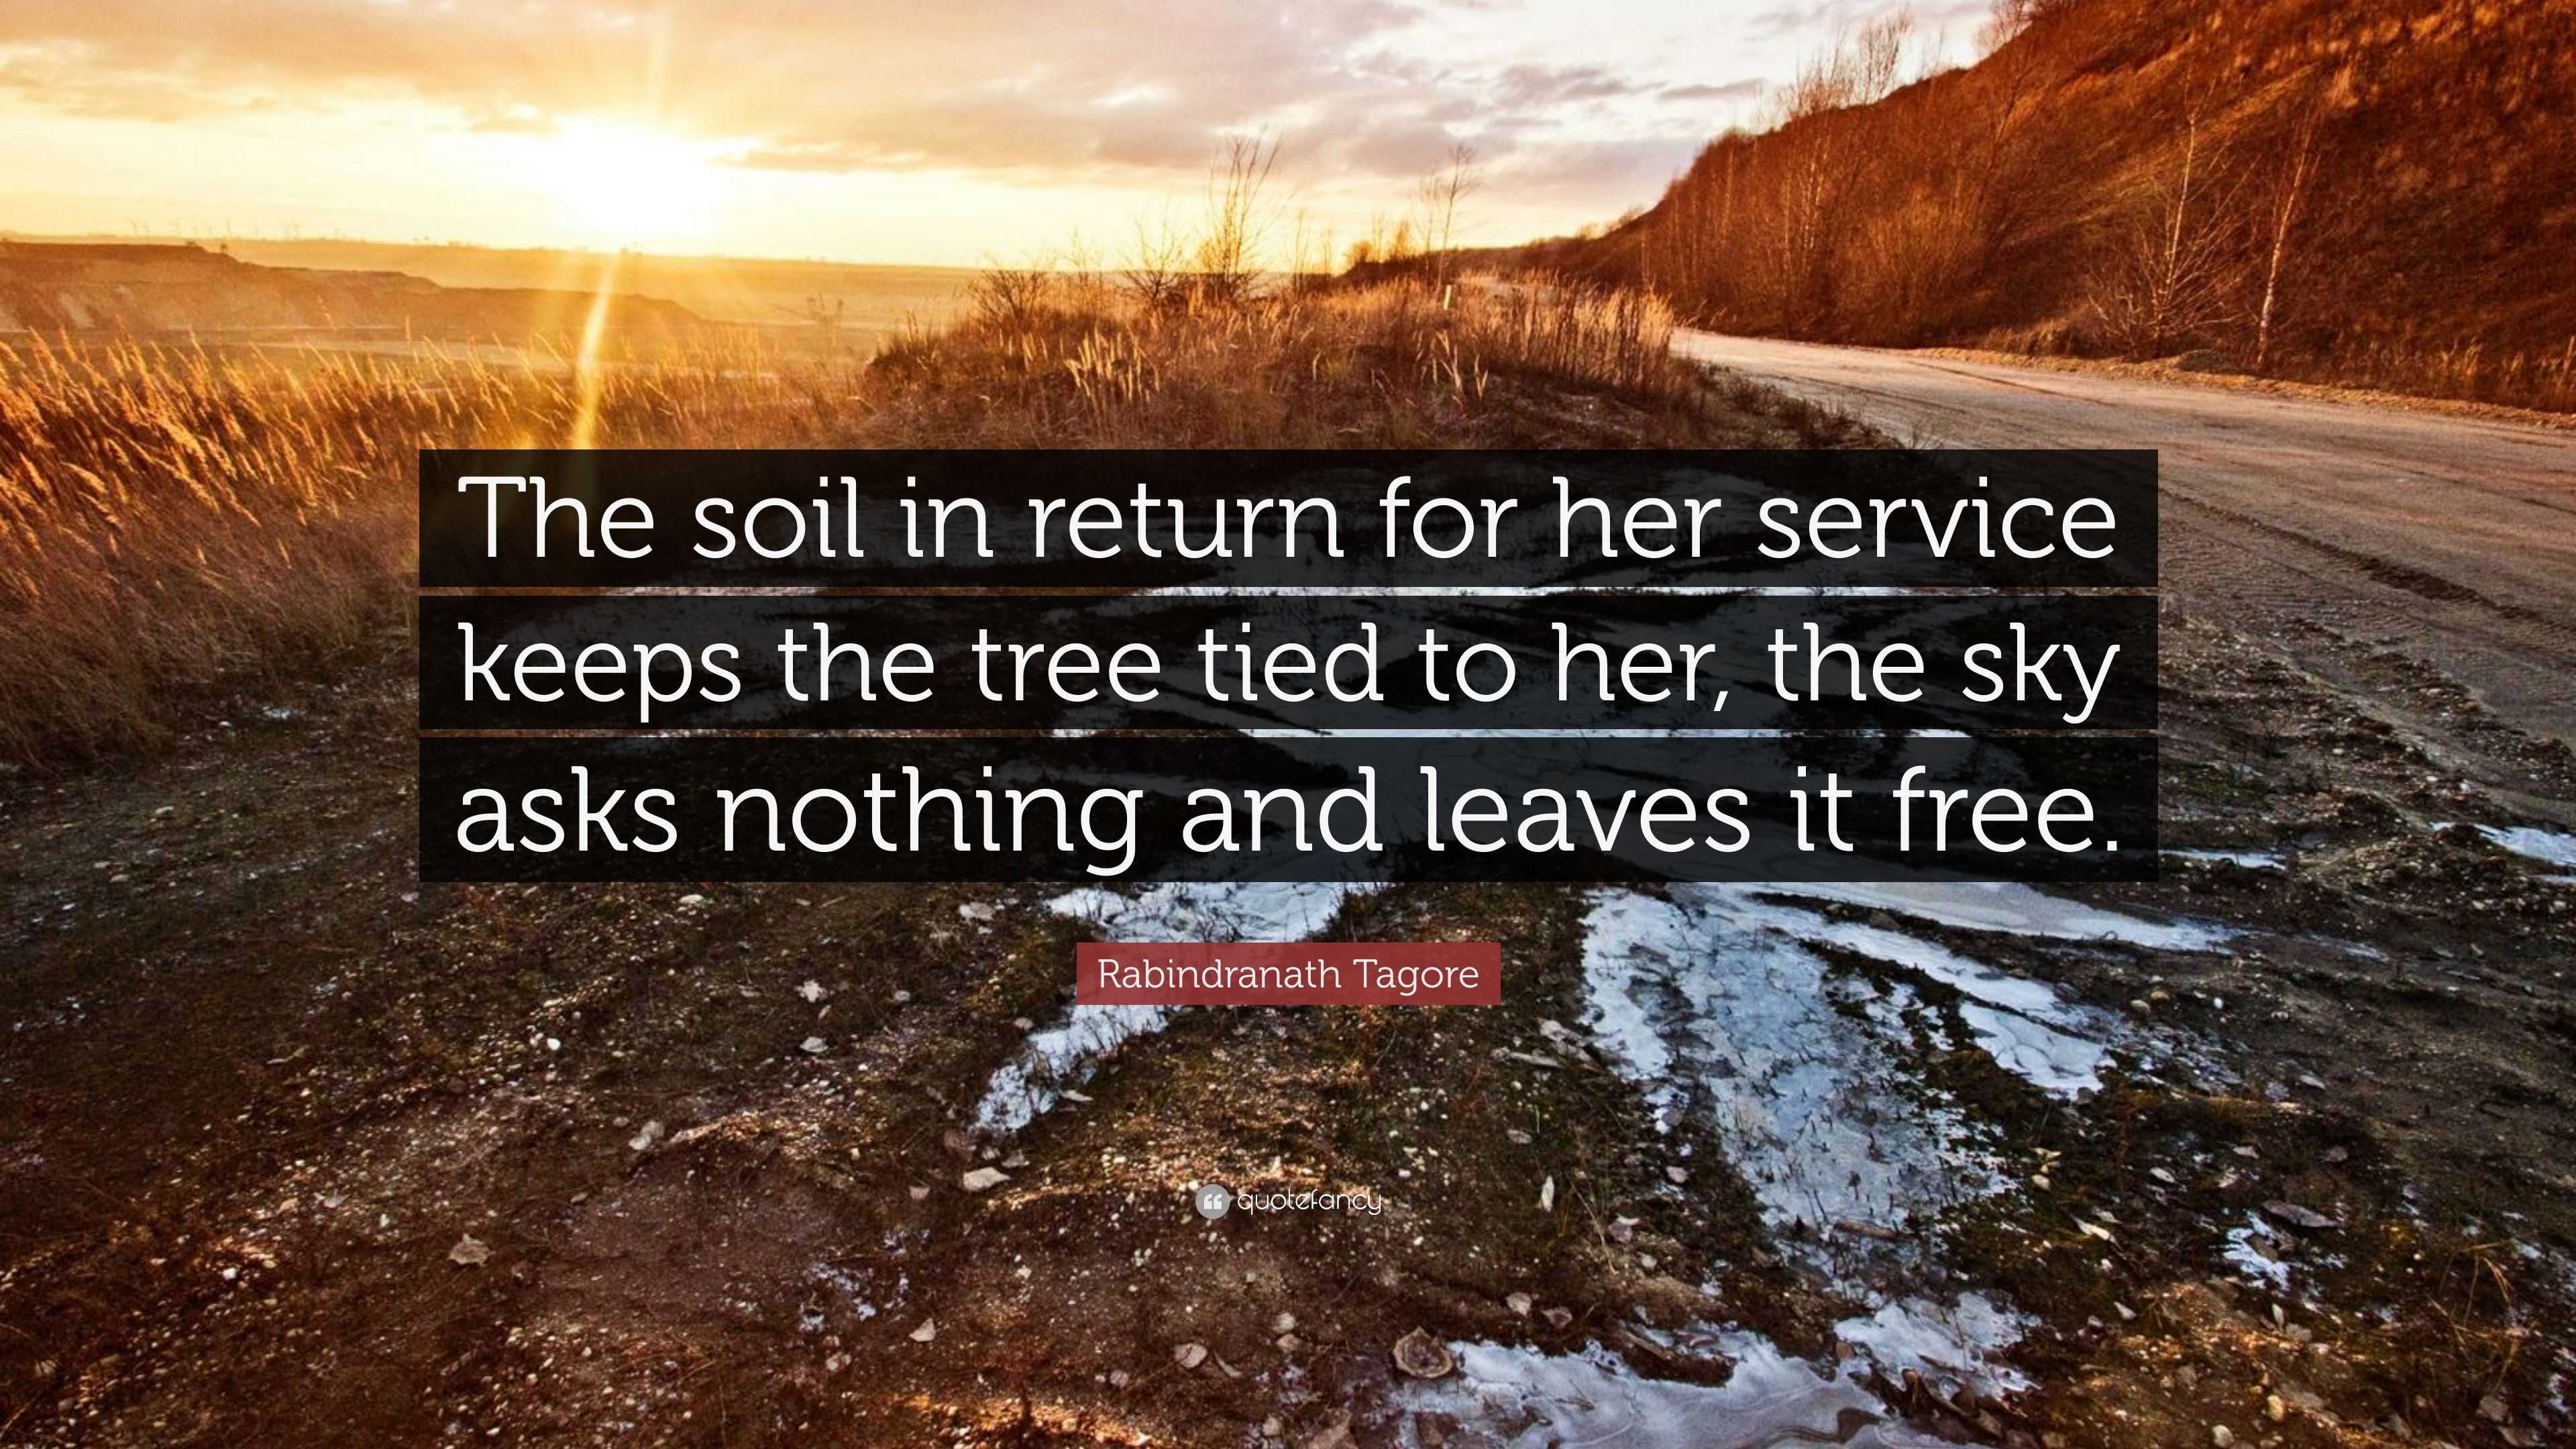 Rabindranath Tagore Quote: “The soil in return for her service keeps the  tree tied to her,